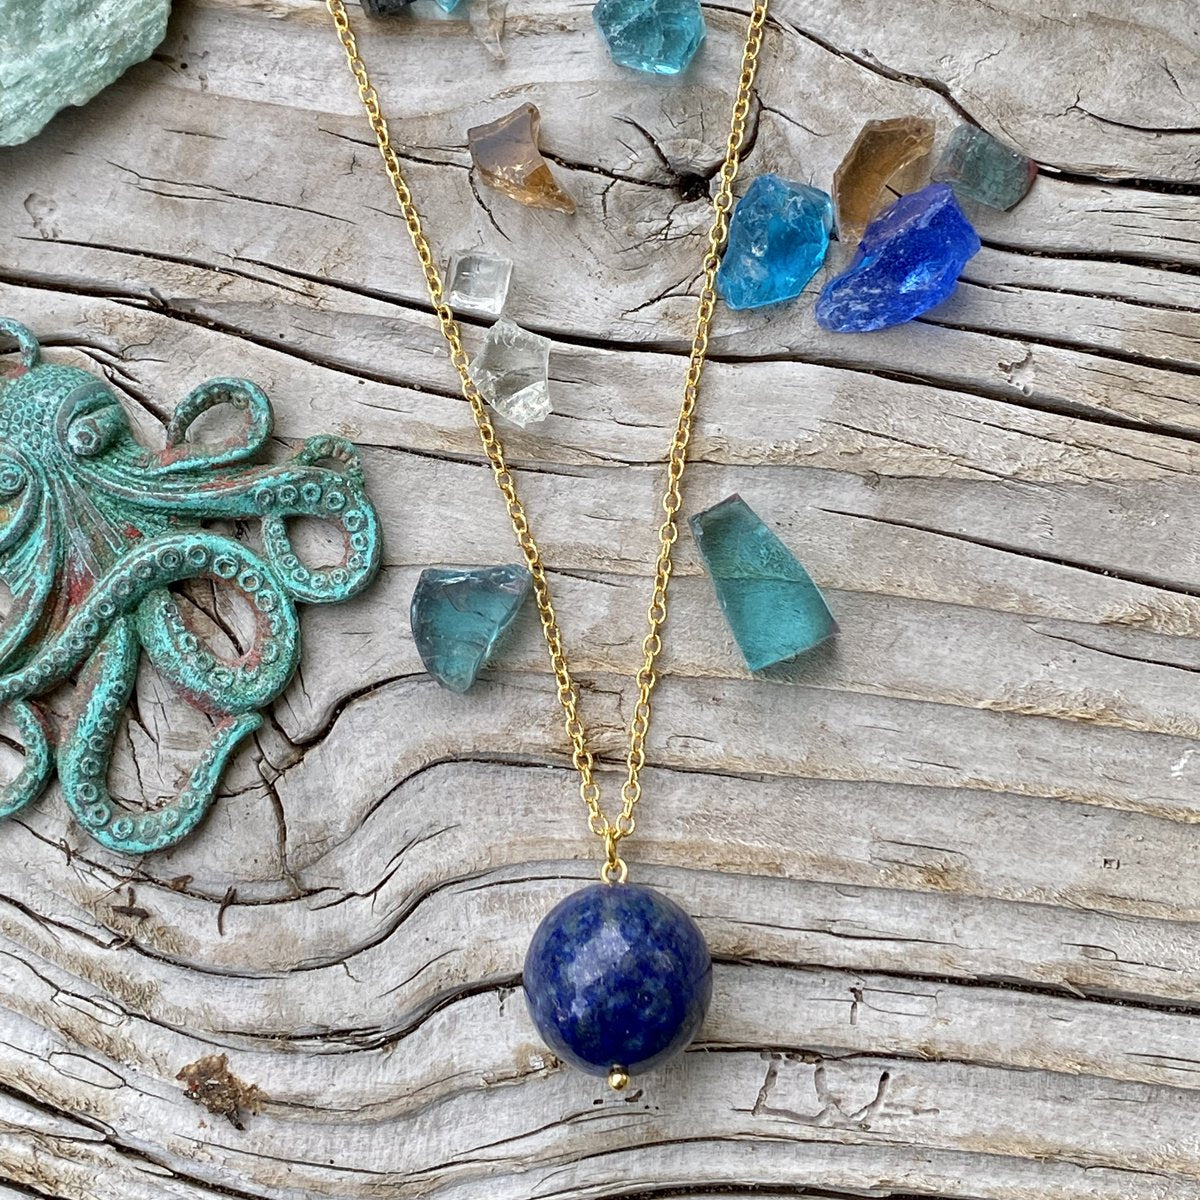 Blue Marble Ocean Blue Gratitude Gold Plated Necklace with Lapis Lazuli Earth Symbol Pendant